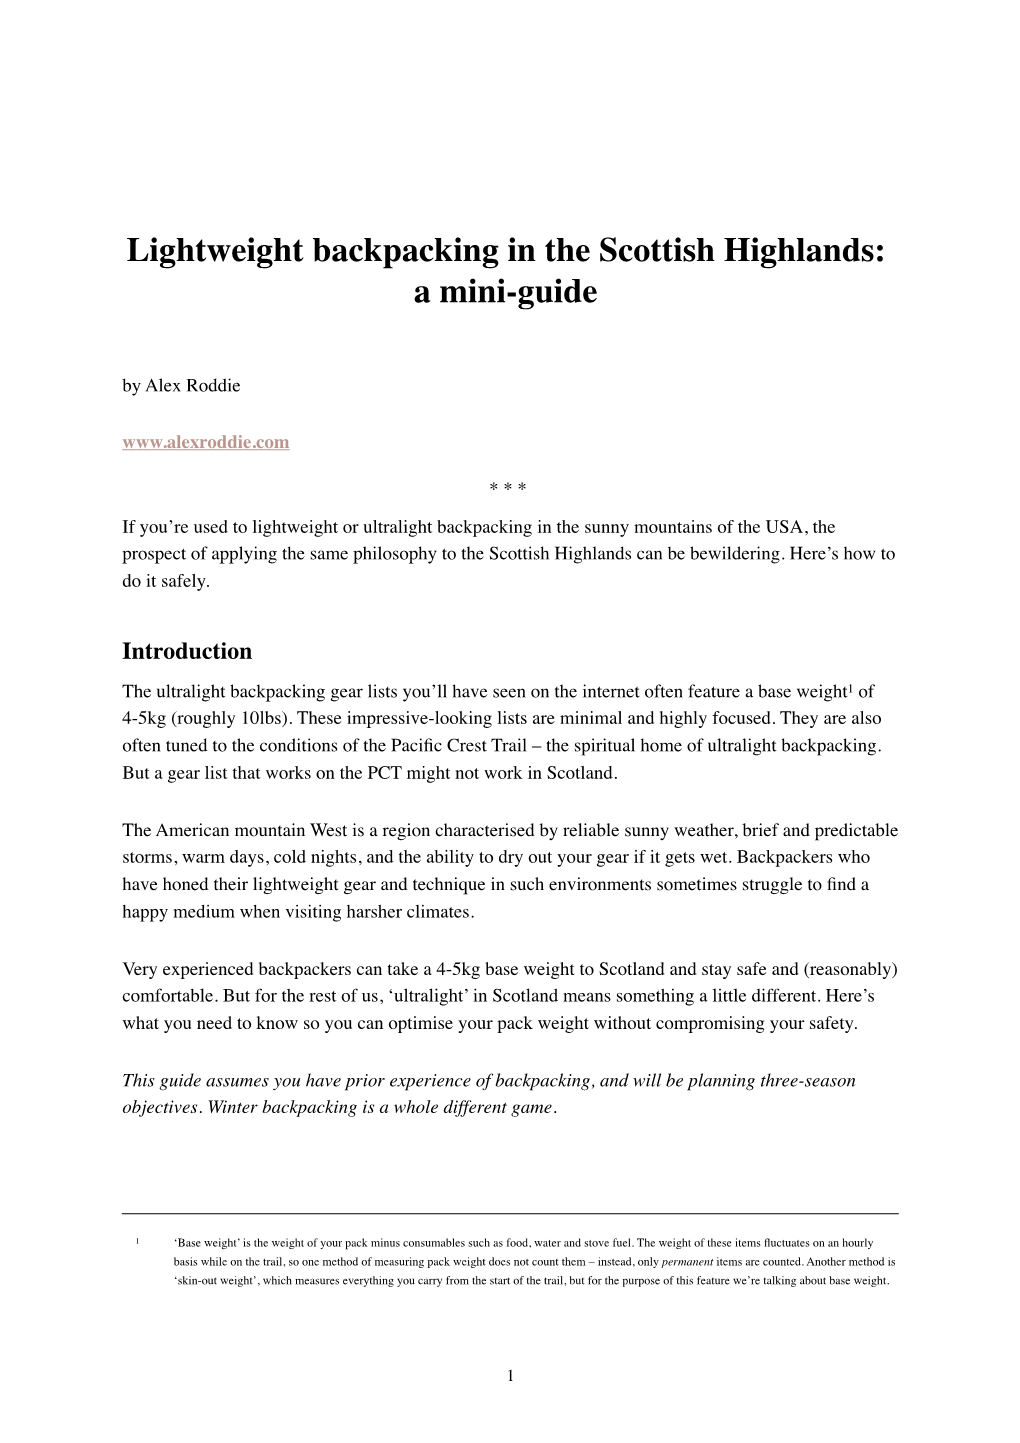 Lightweight Backpacking in the Scottish Highlands: a Mini-Guide